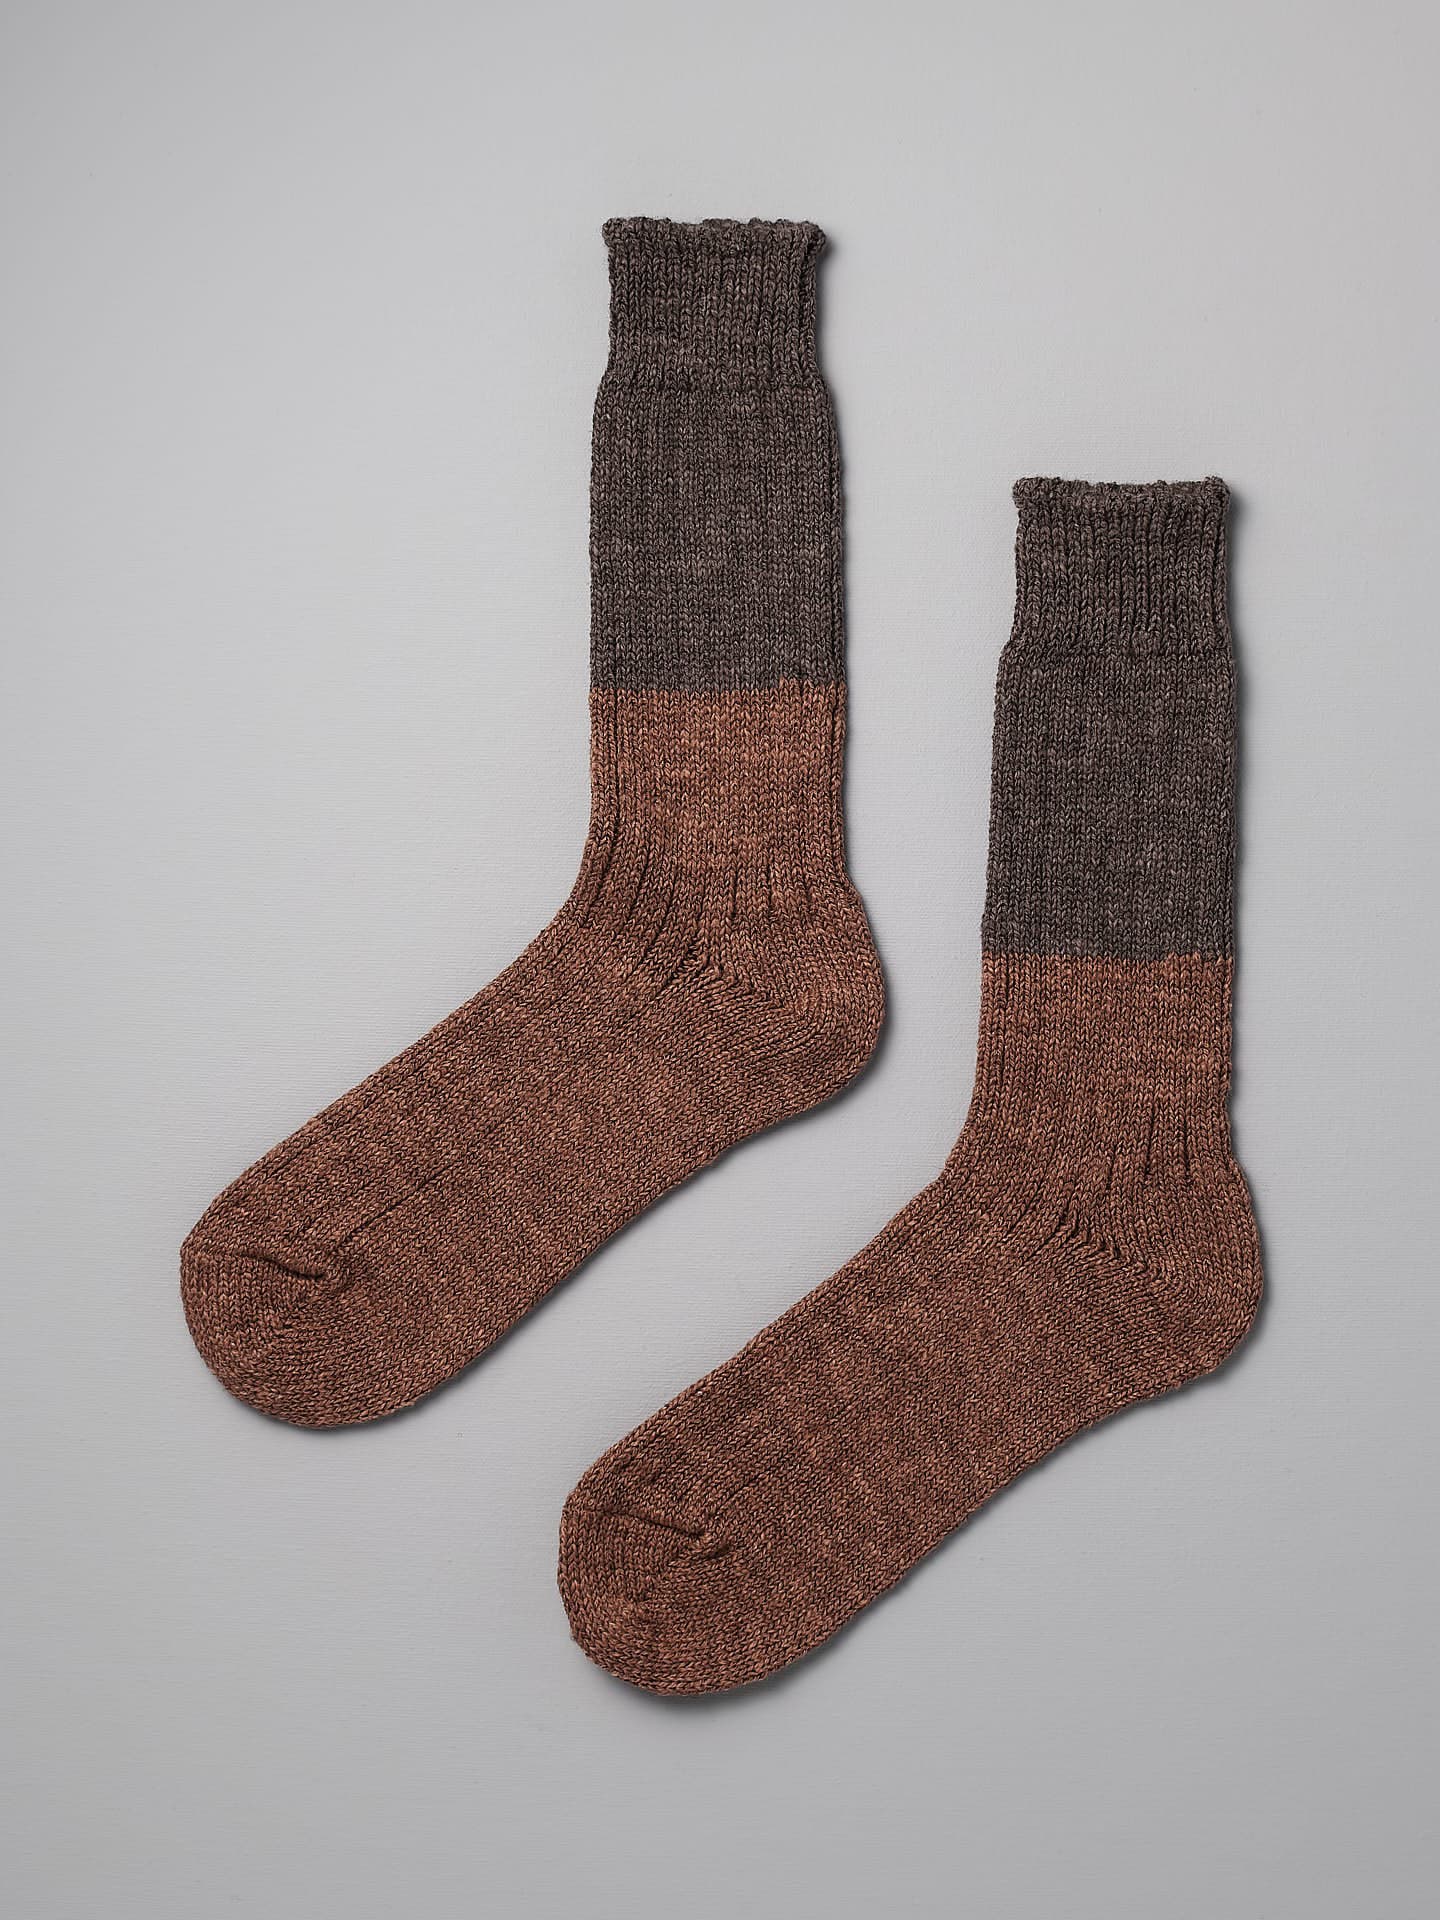 Two Nishiguchi Kutsushita Boston Slab Socks – Brown Fawn with a two-tone design, featuring a darker brown color above the ankle and a lighter brown color covering the foot and lower calf, are laid flat on a light grey surface. Available in both men's and women's shoe sizes, they correspond to the EUR and US size charts.